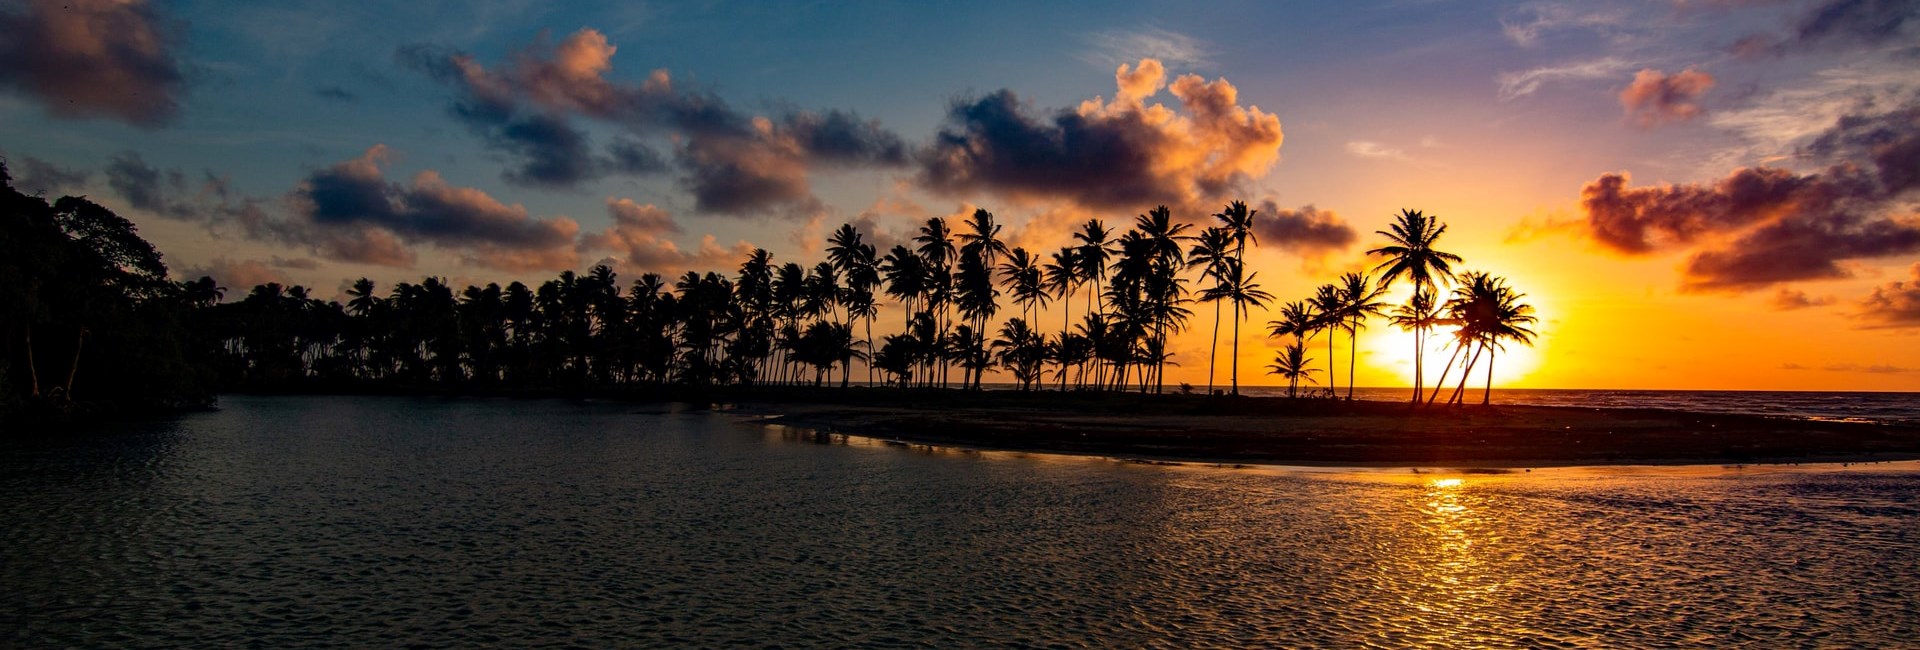 Sunset behind palm trees on a tropical beach